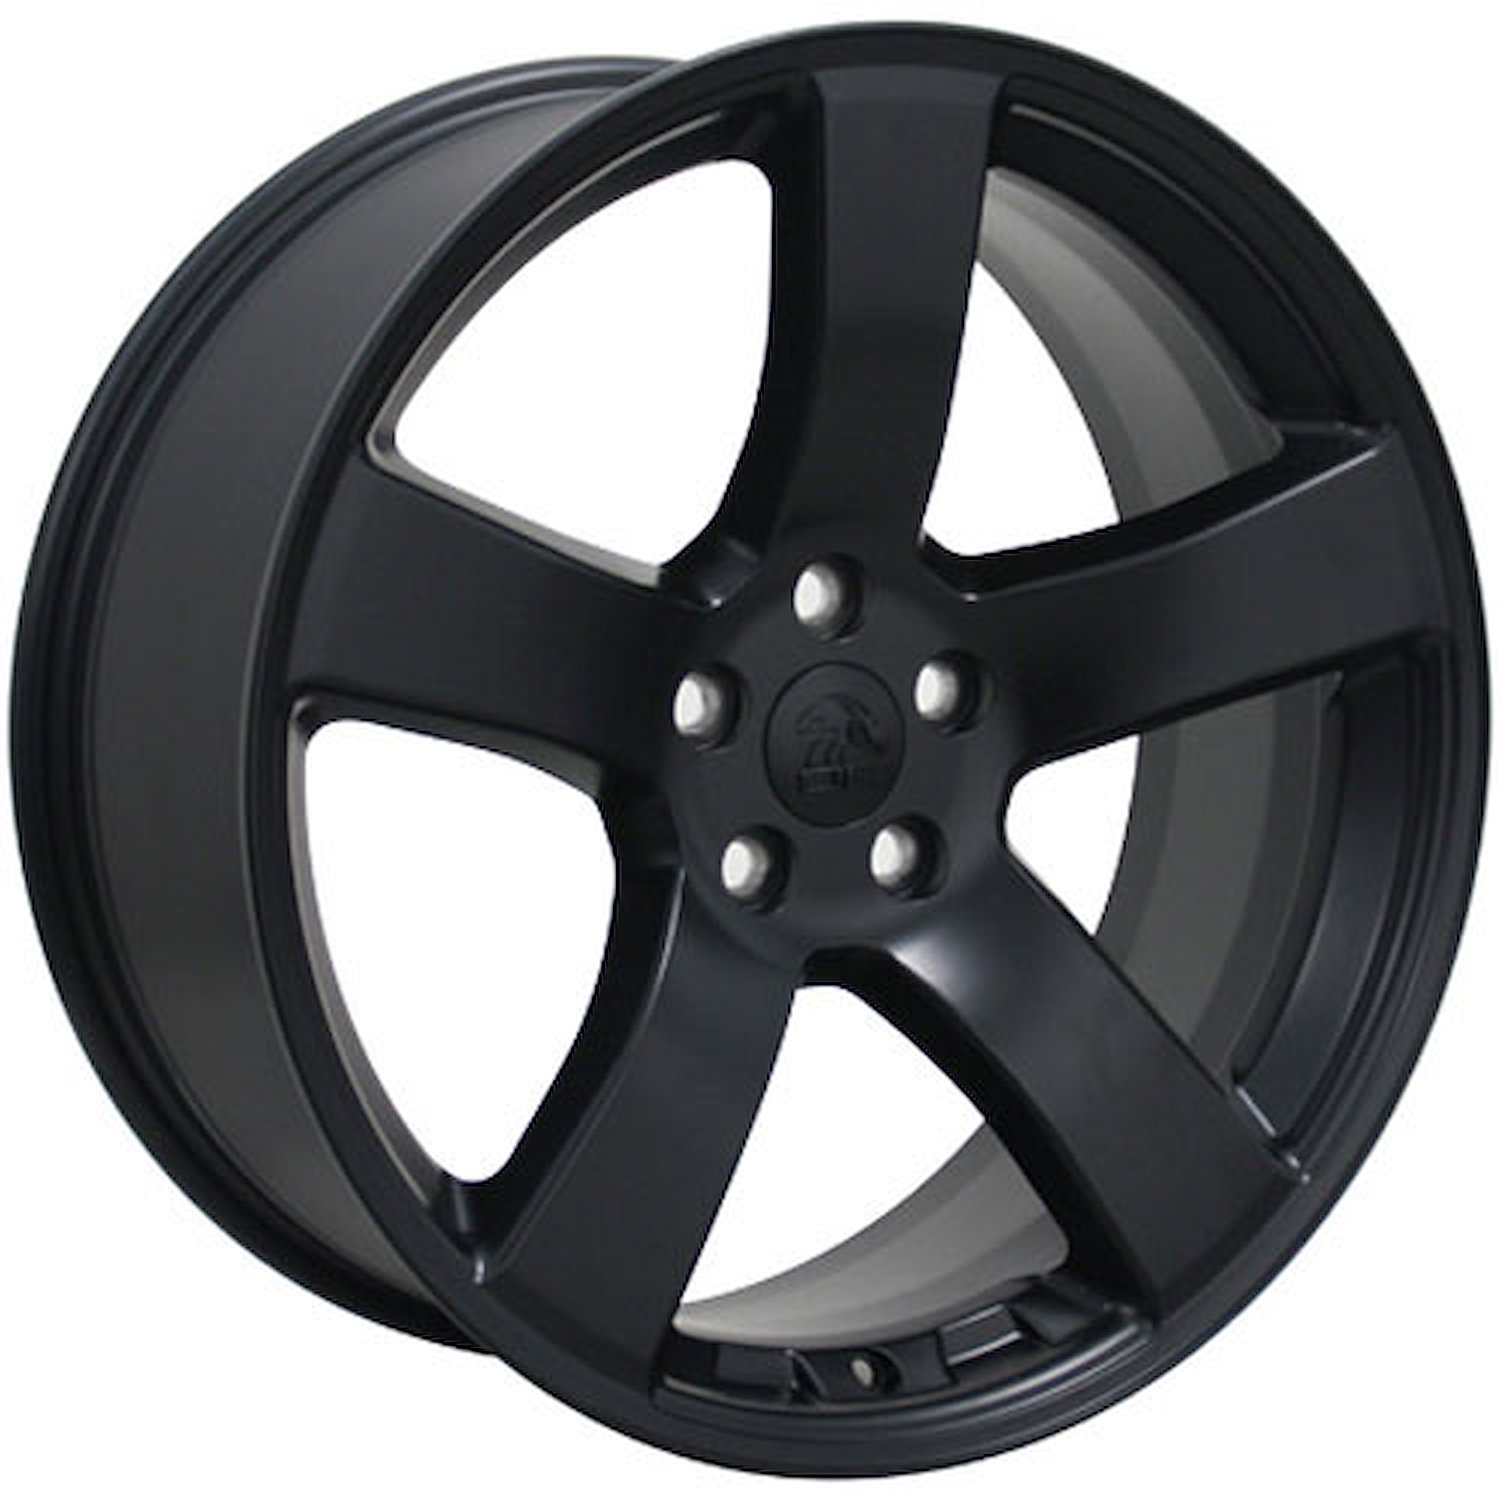 Dodge Charger Style Wheel Size: 20